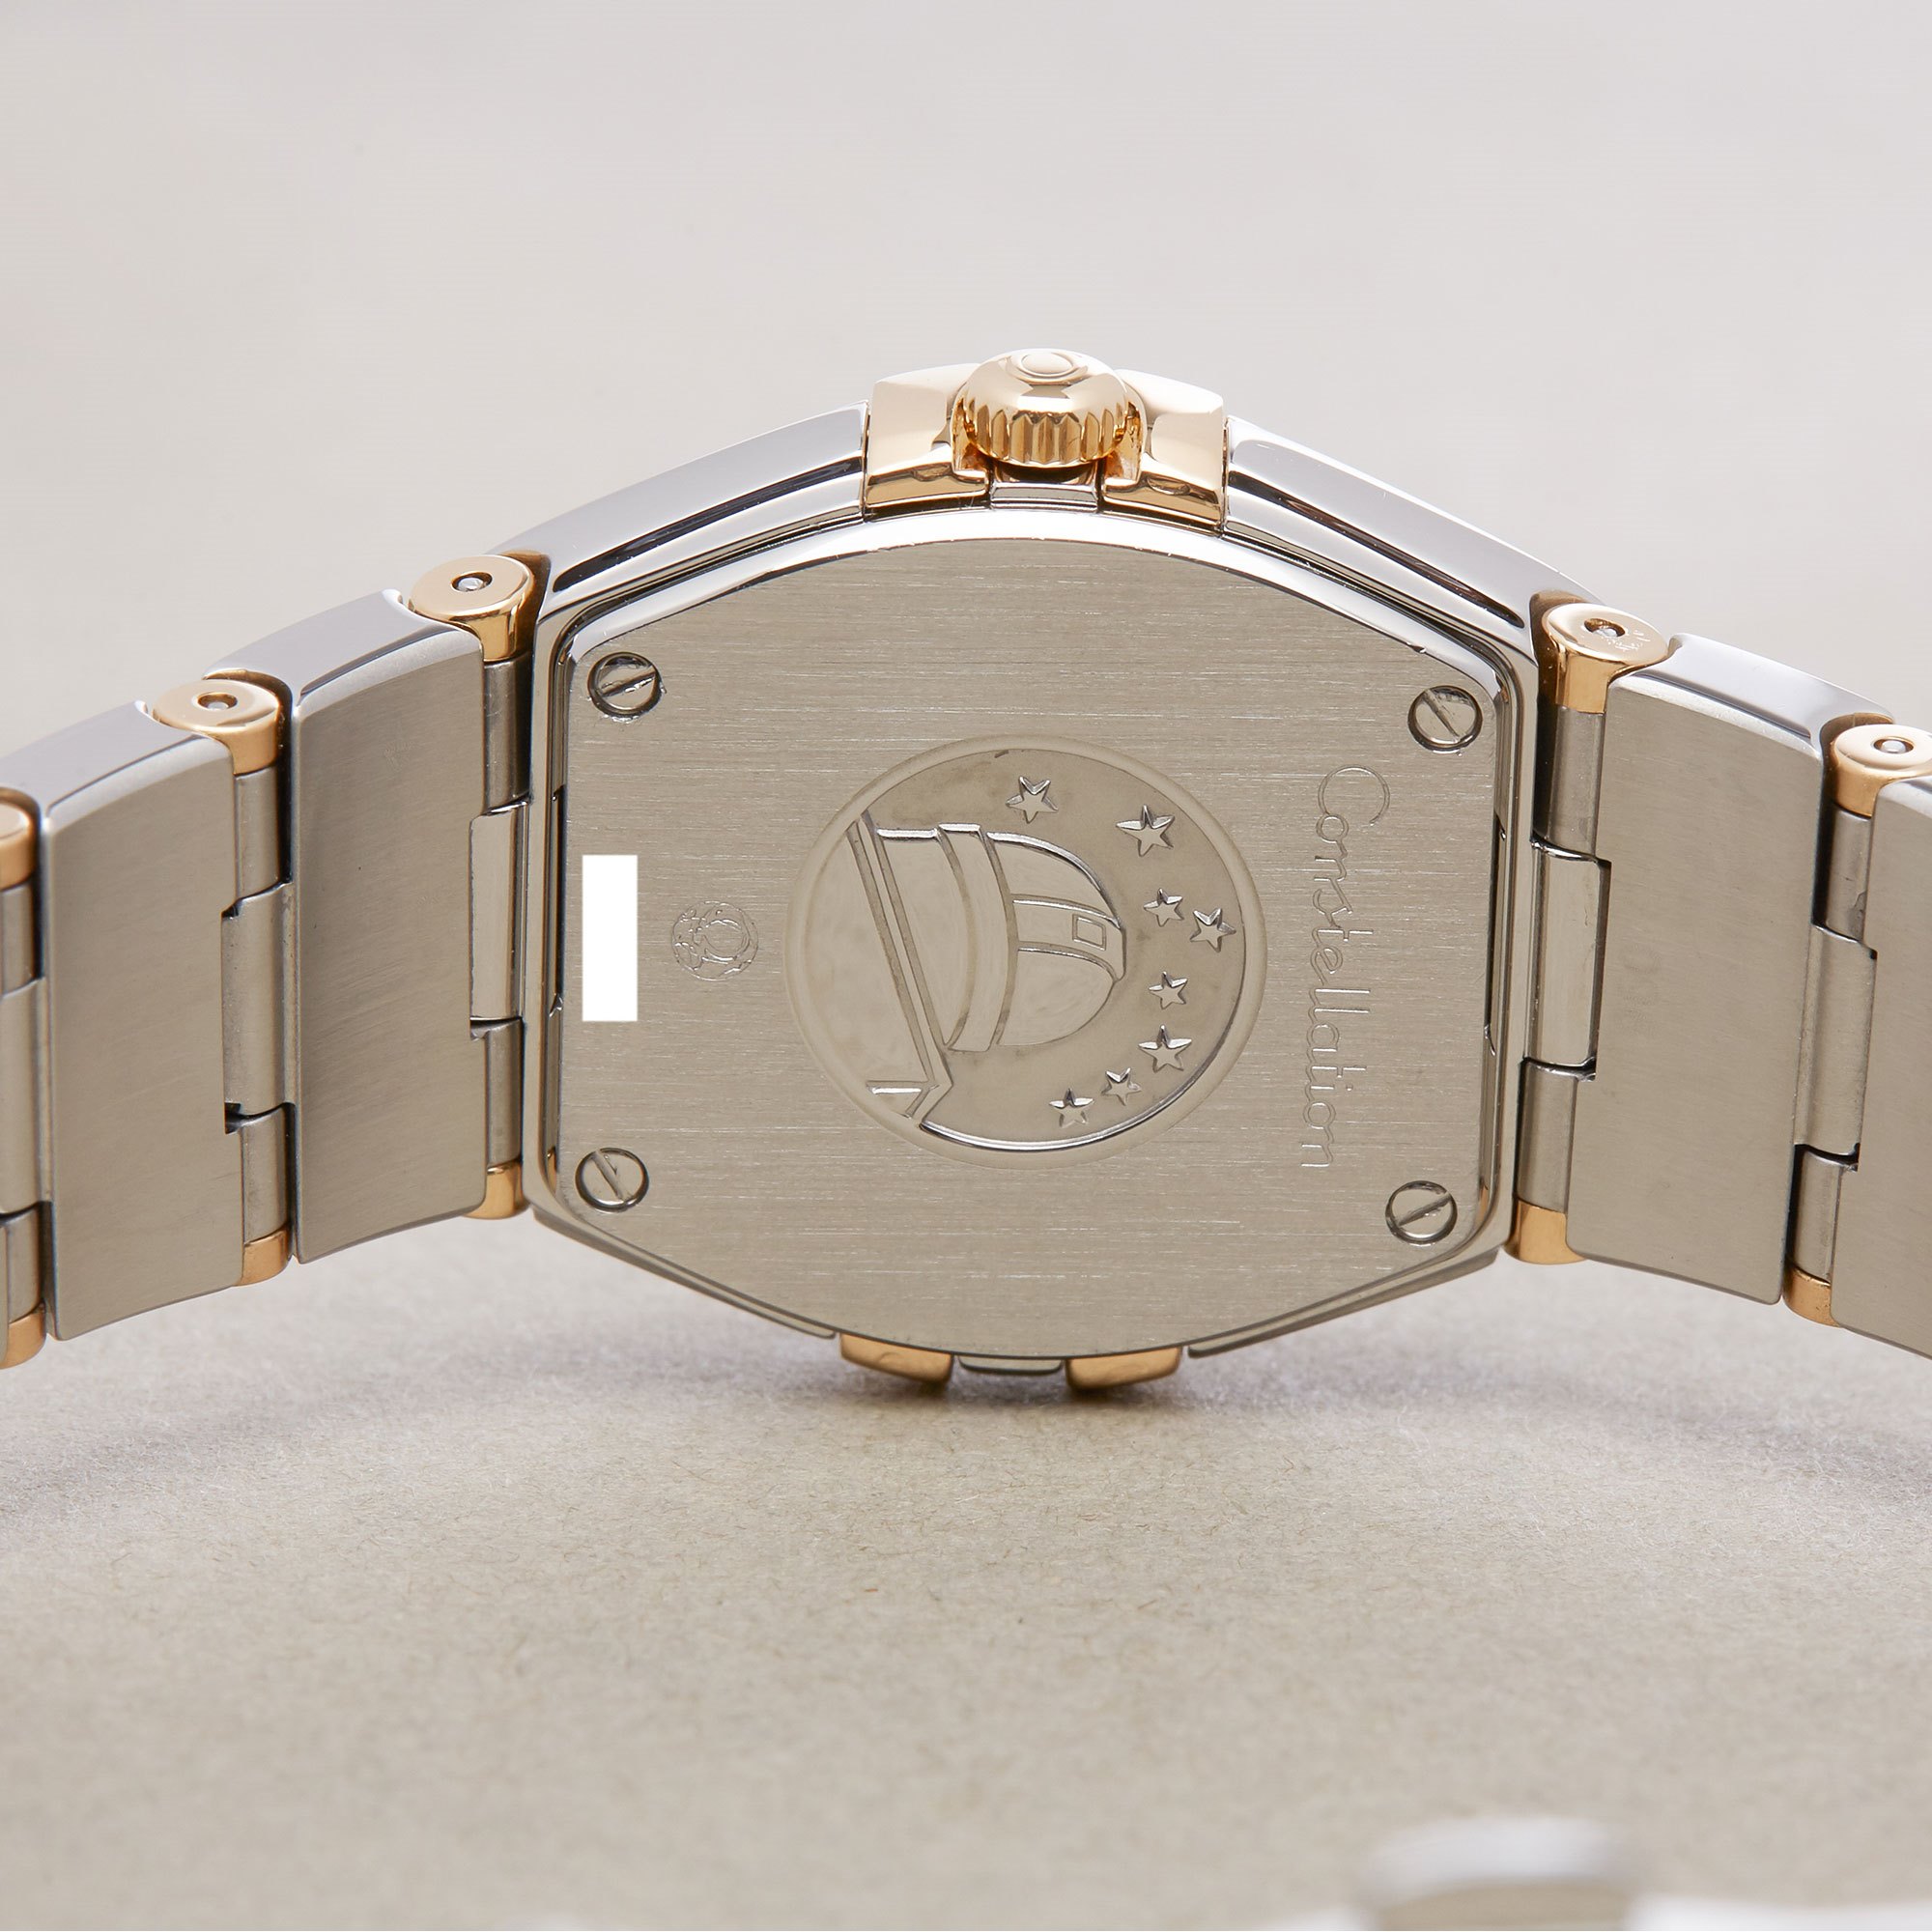 Omega Constellation 18K Yellow Gold & Stainless Steel 123.20.24.60.05.002